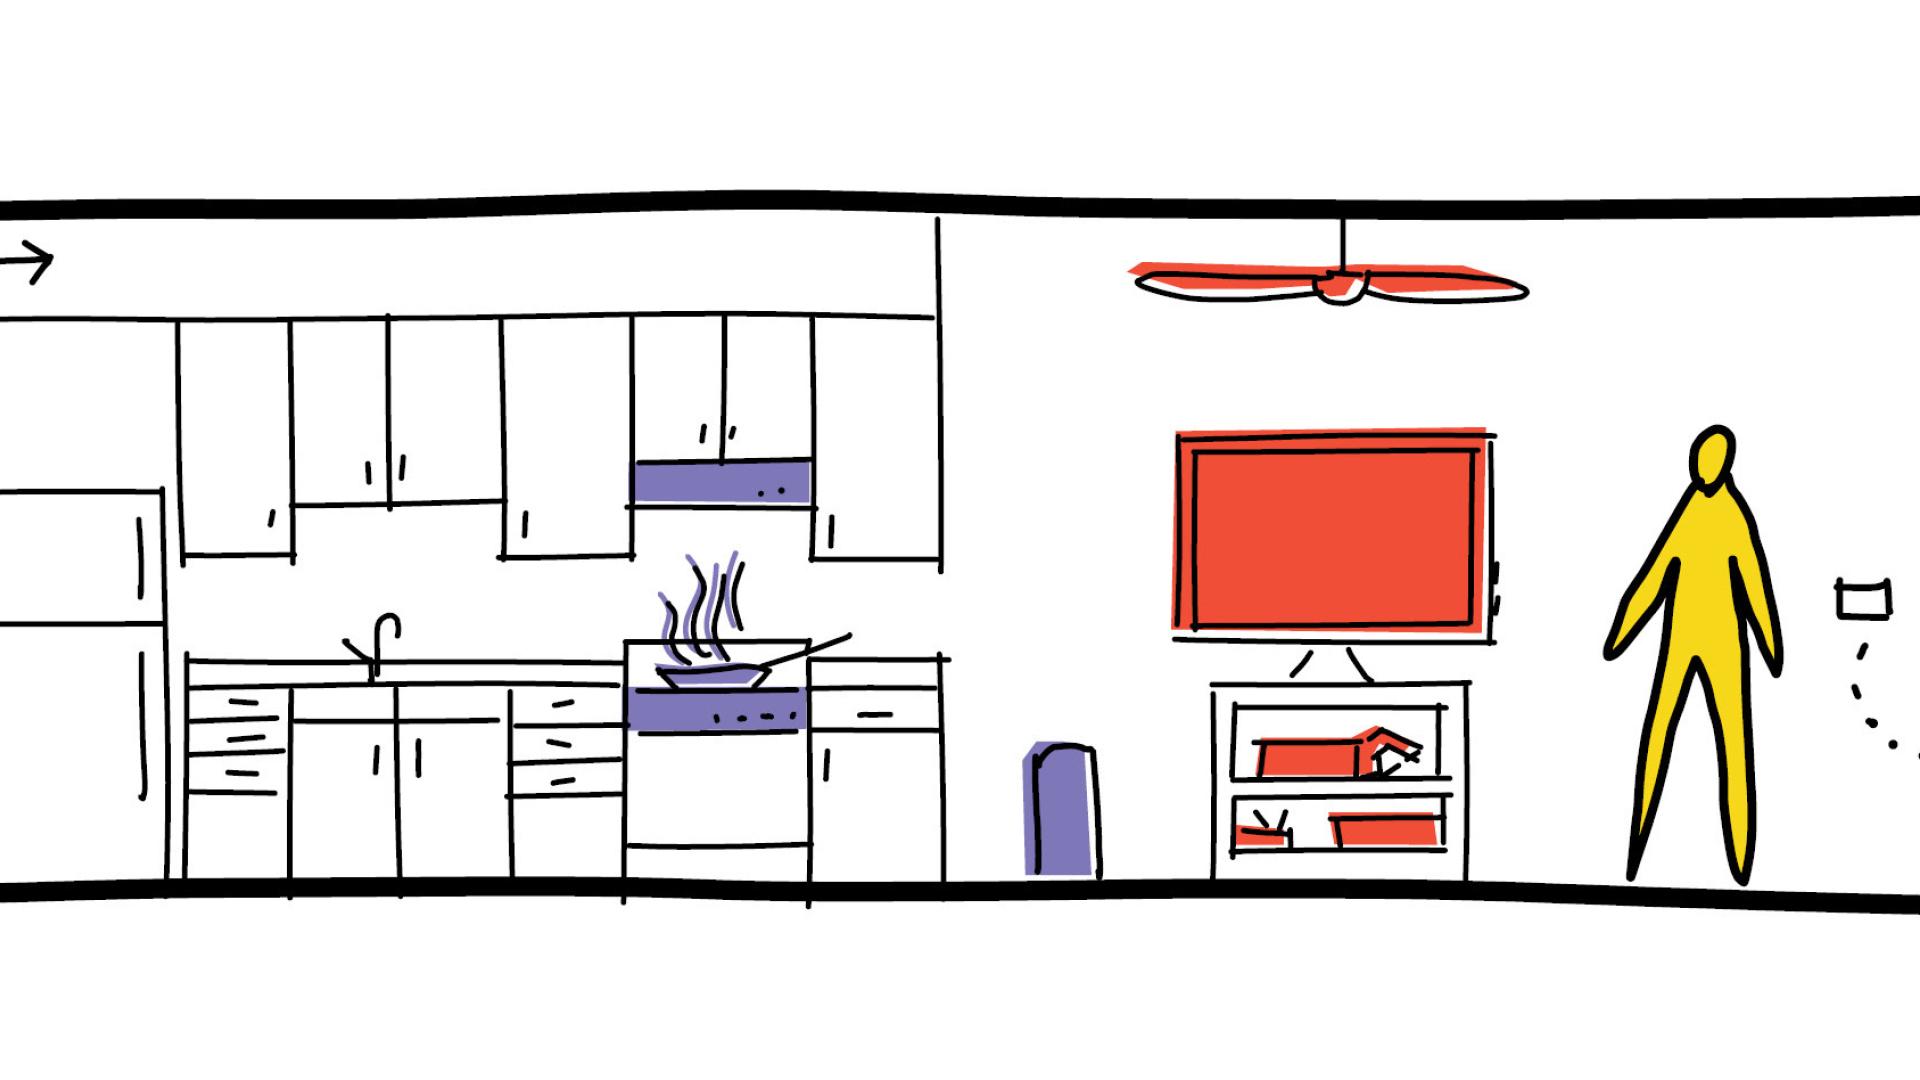 Illustration of apartment features for fire-season safety